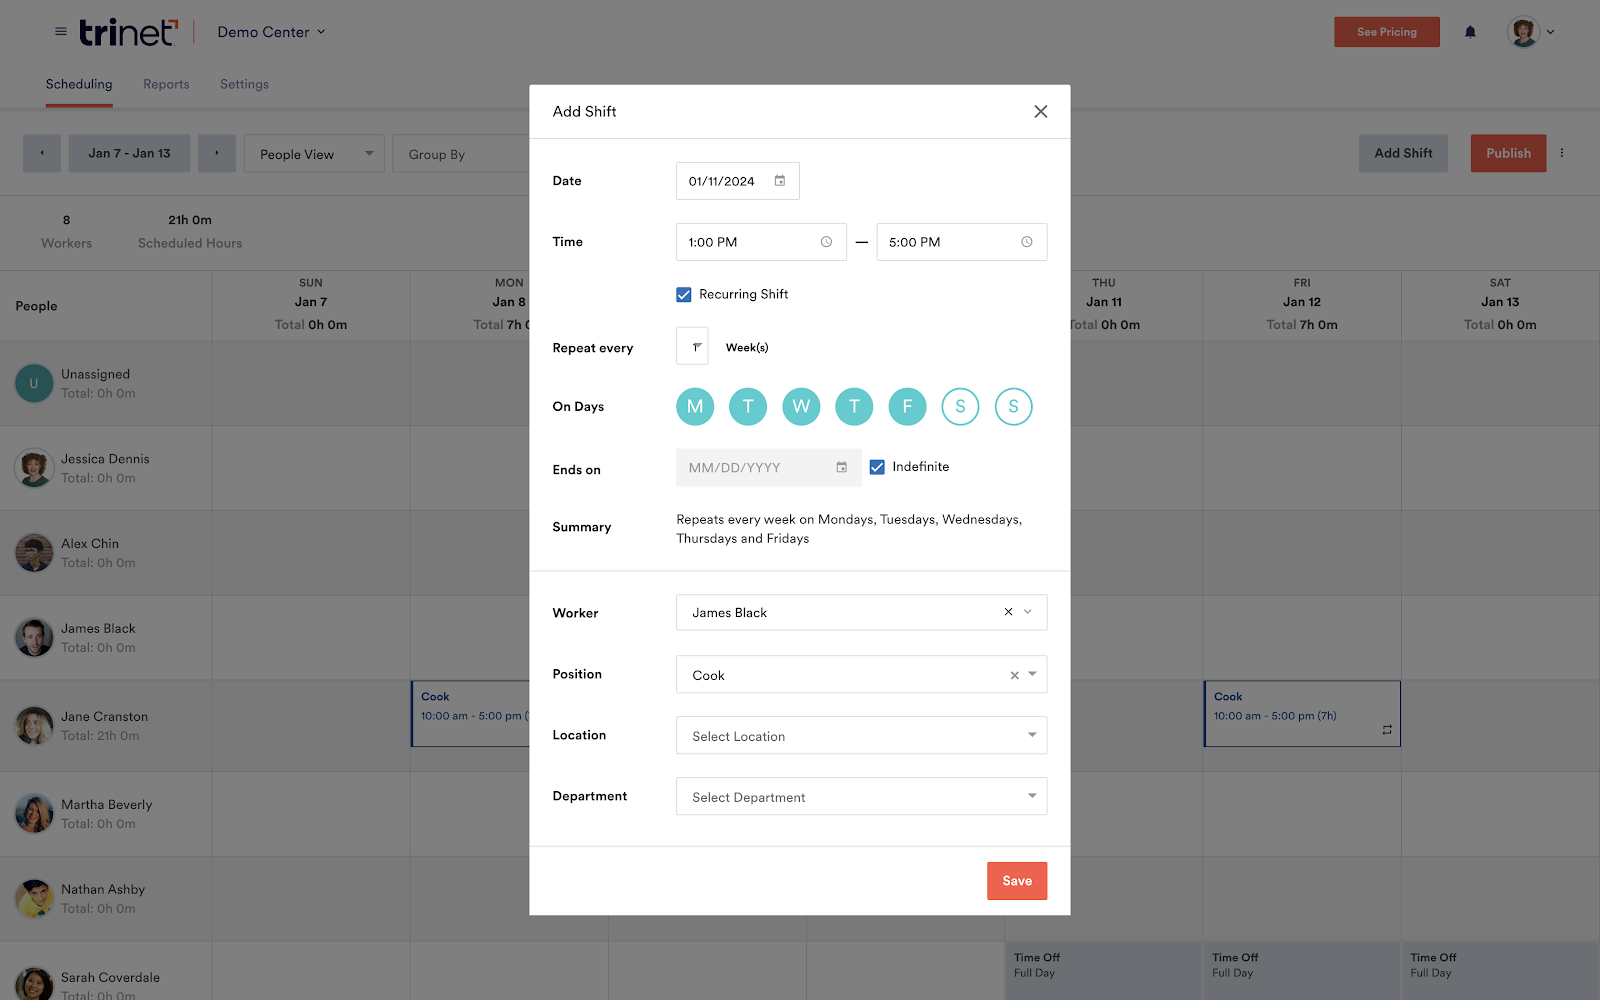 TriNet HR Platform displays its weekly schedule calendar with a pop-up window for adding a shift, plus fields to configure date, time, recurring shift days, and worker assignment.